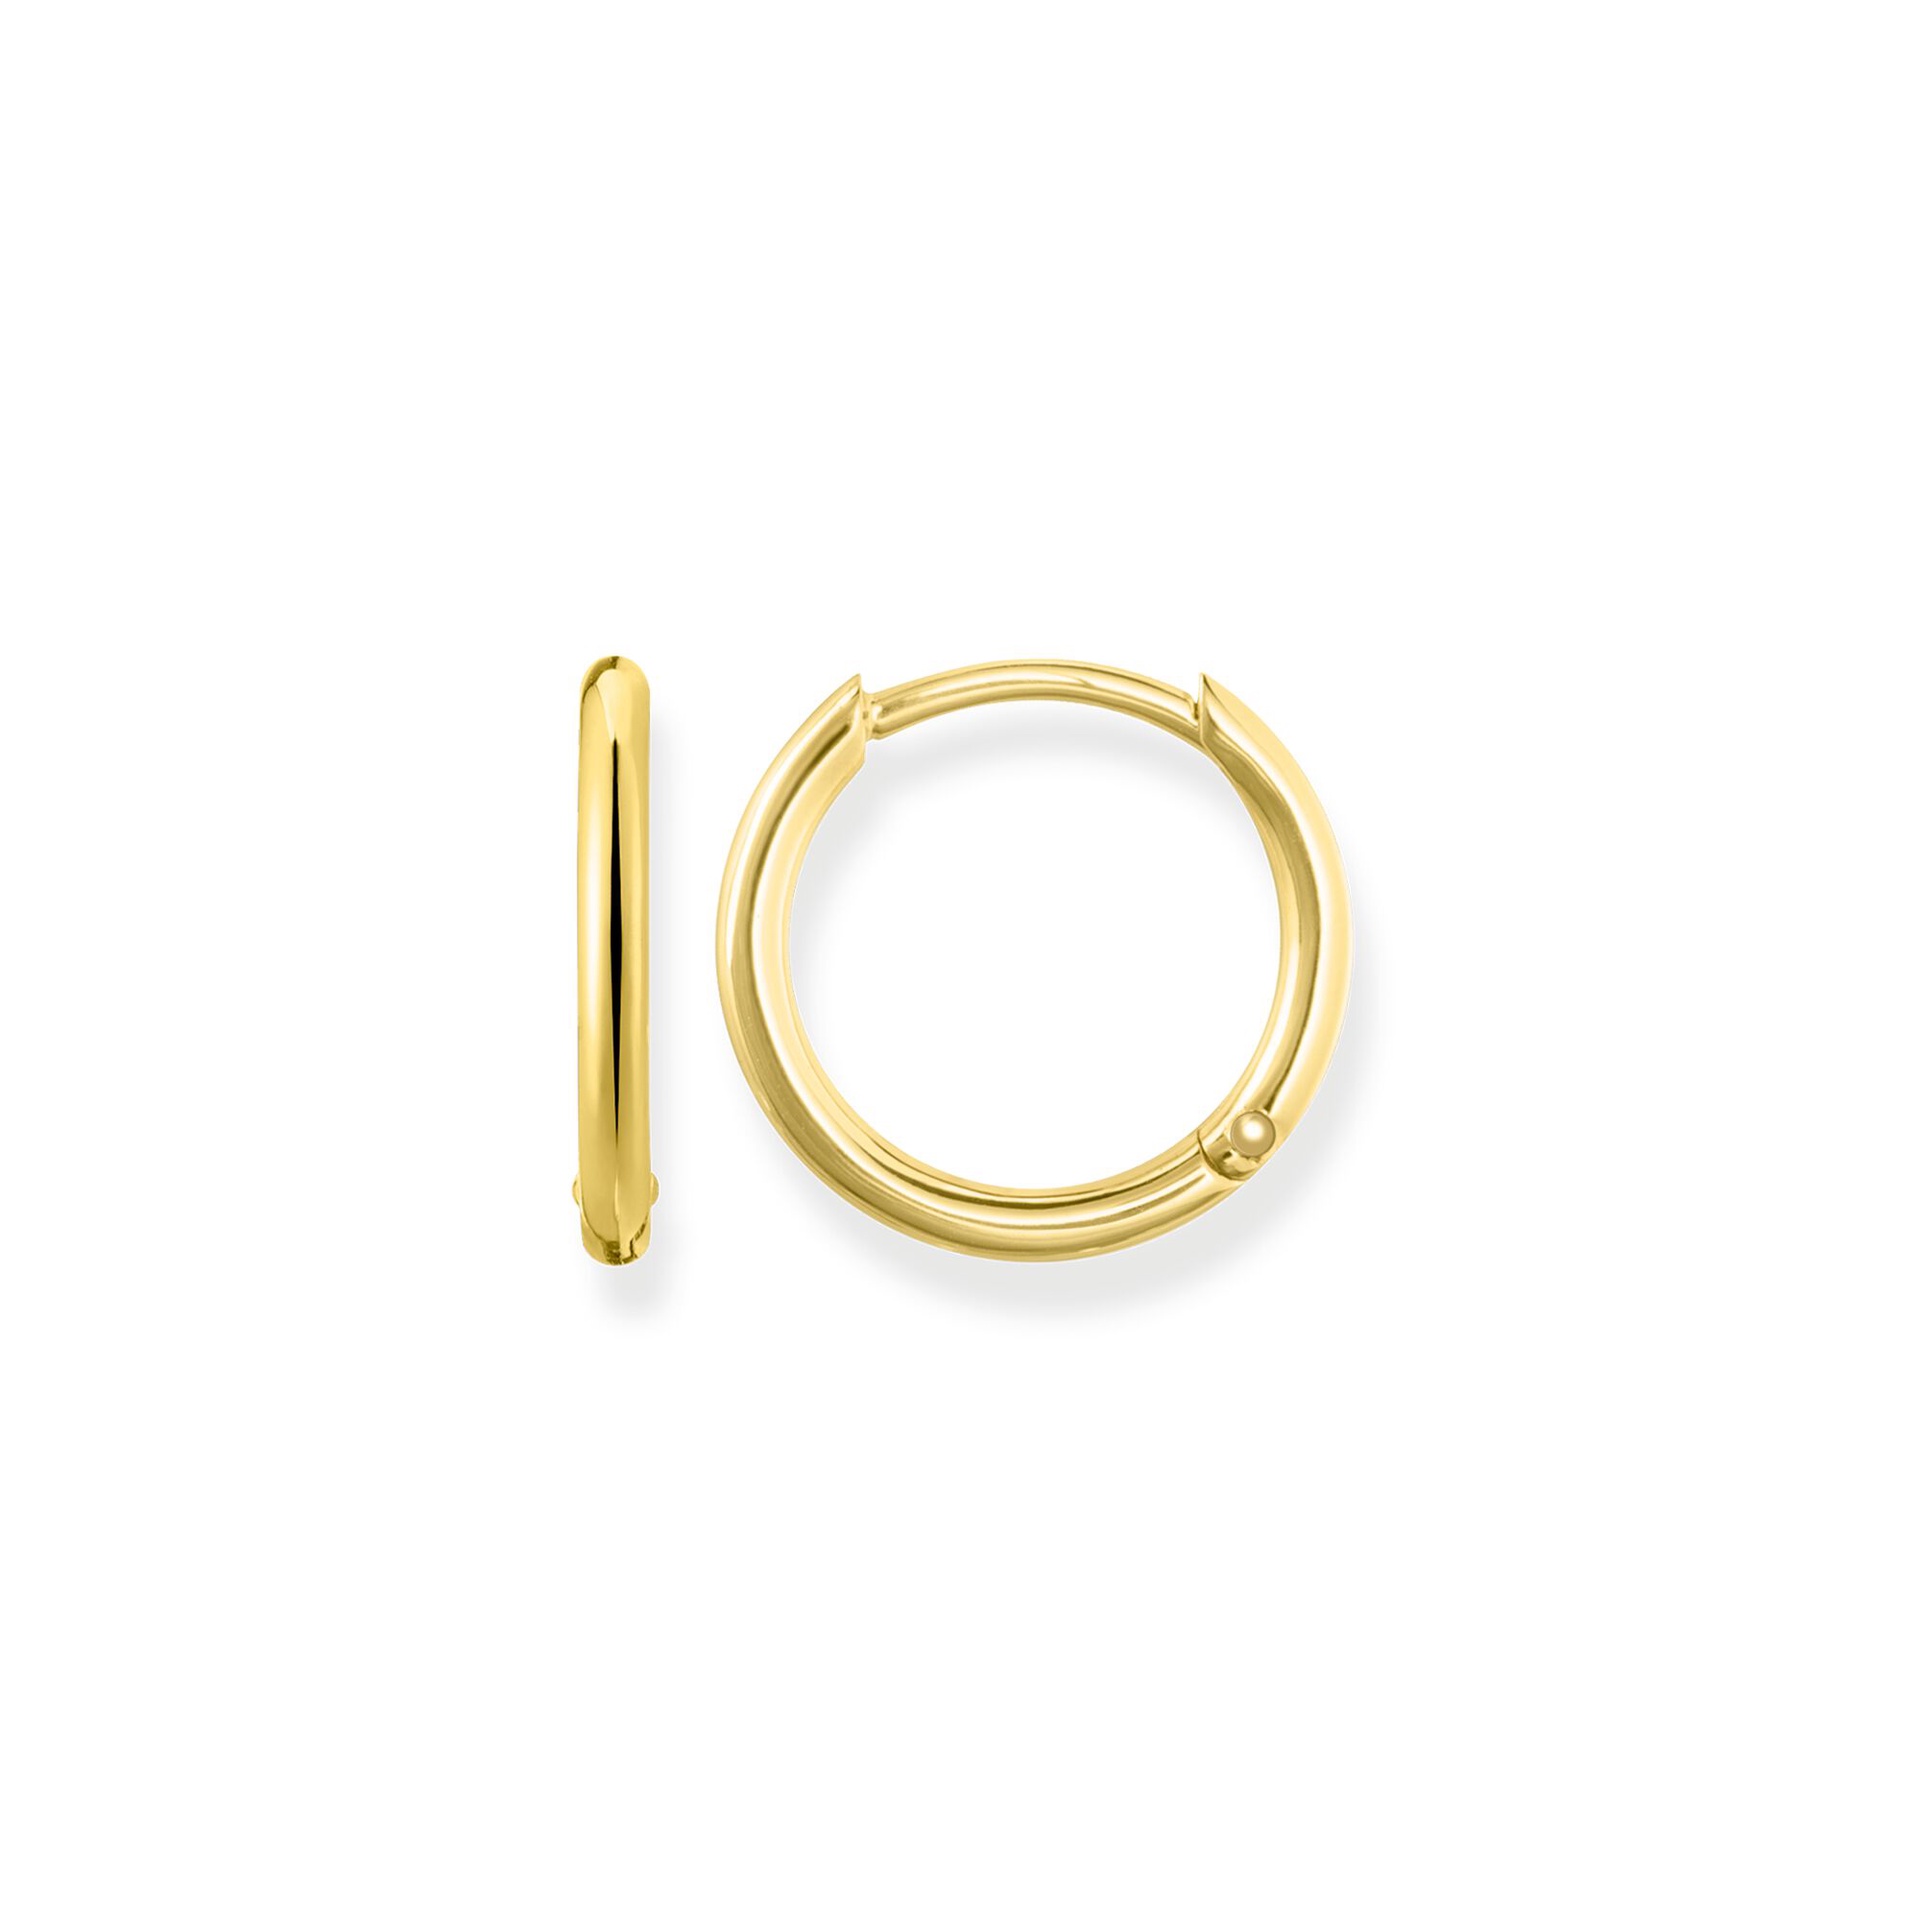 Thomas Sabo Classic Small Hoop Earrings - Yellow Gold CR608-413-12